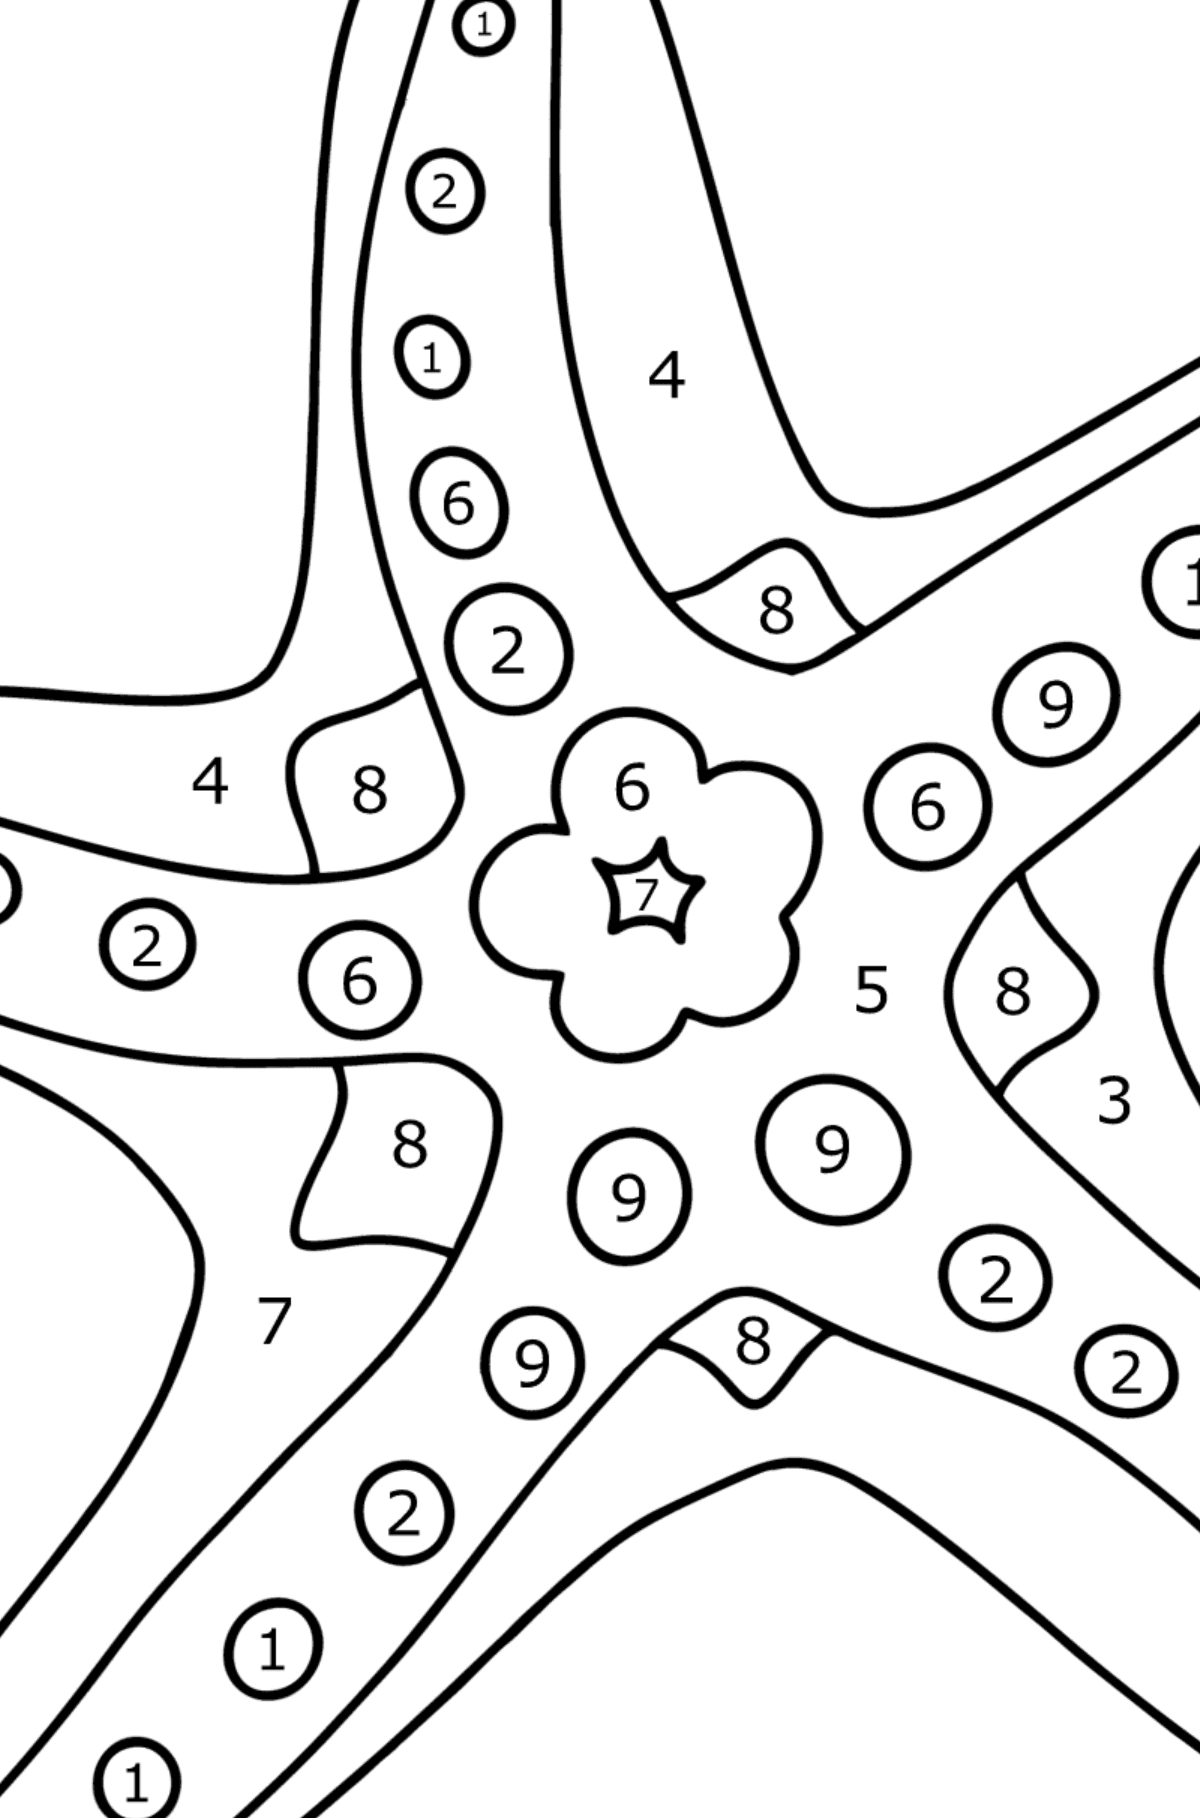 Starfish coloring page - Coloring by Numbers for Kids